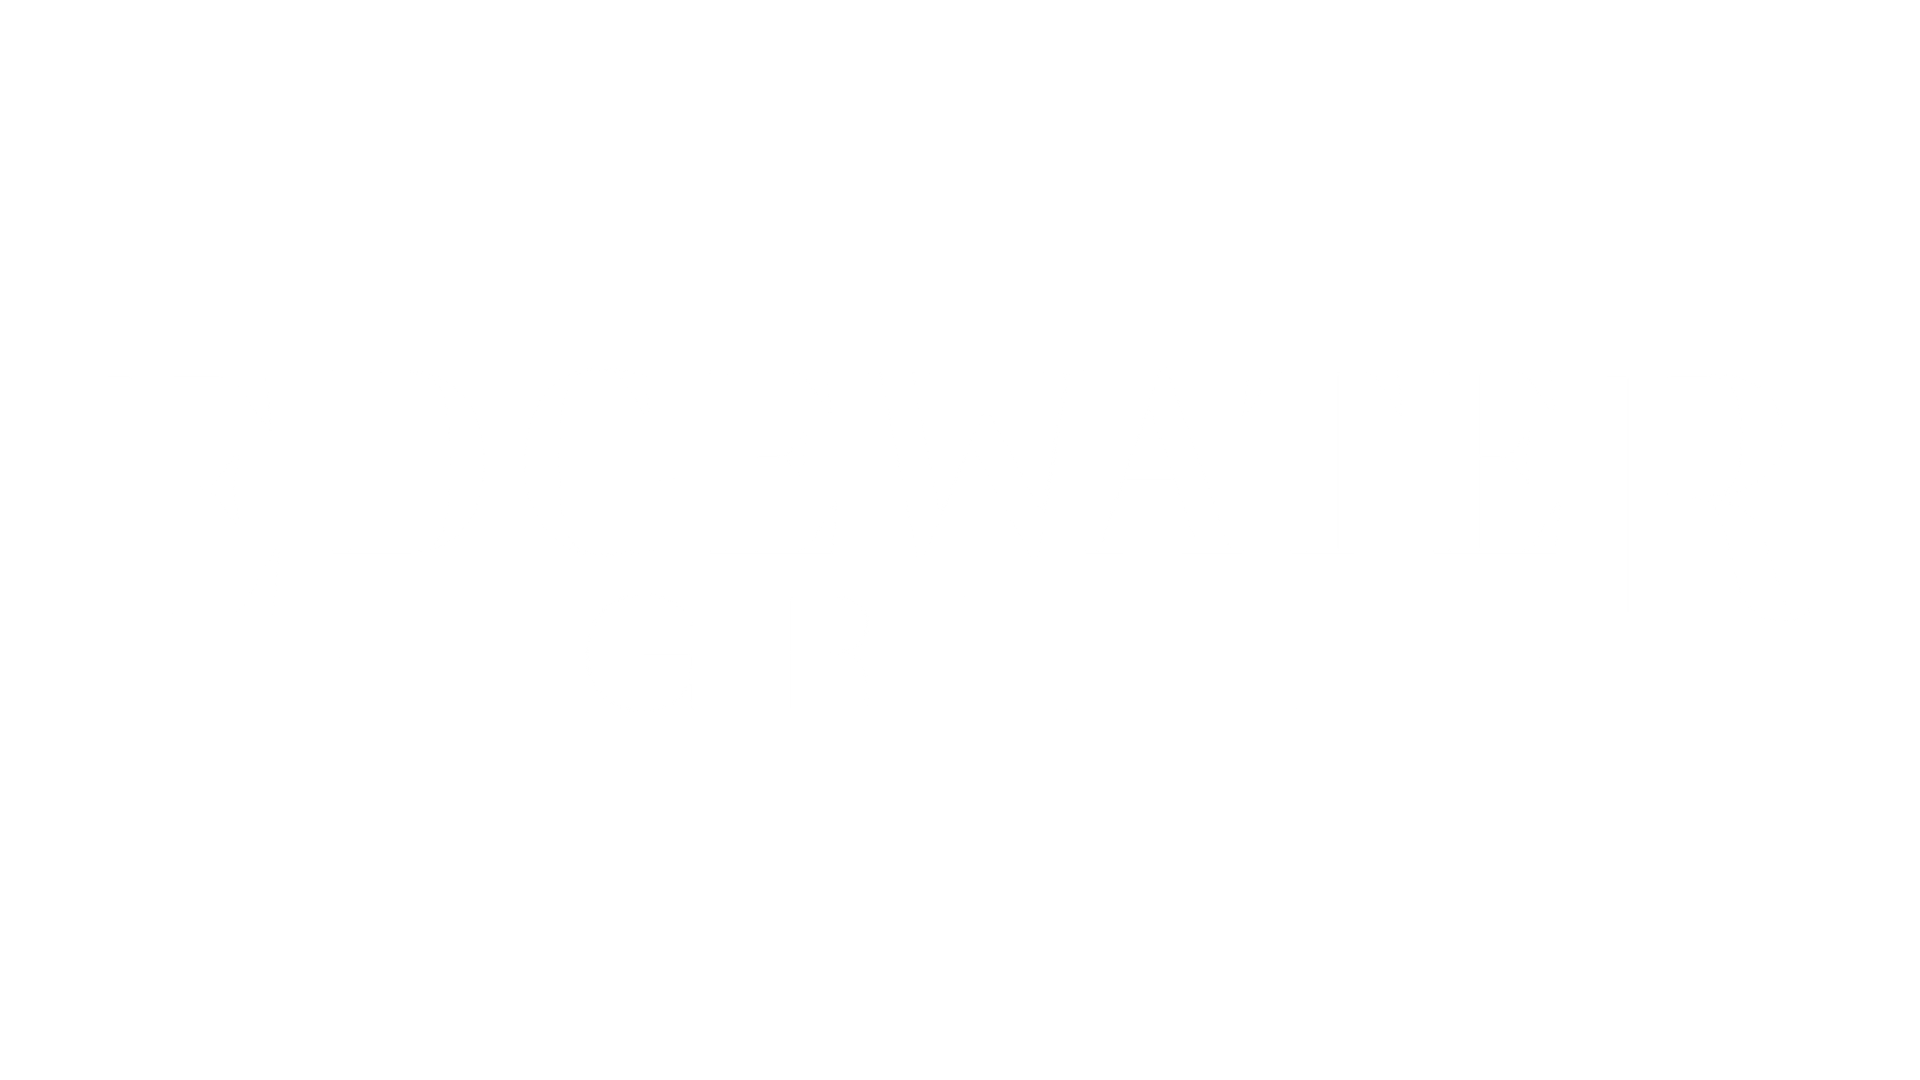 Edgewater Grill